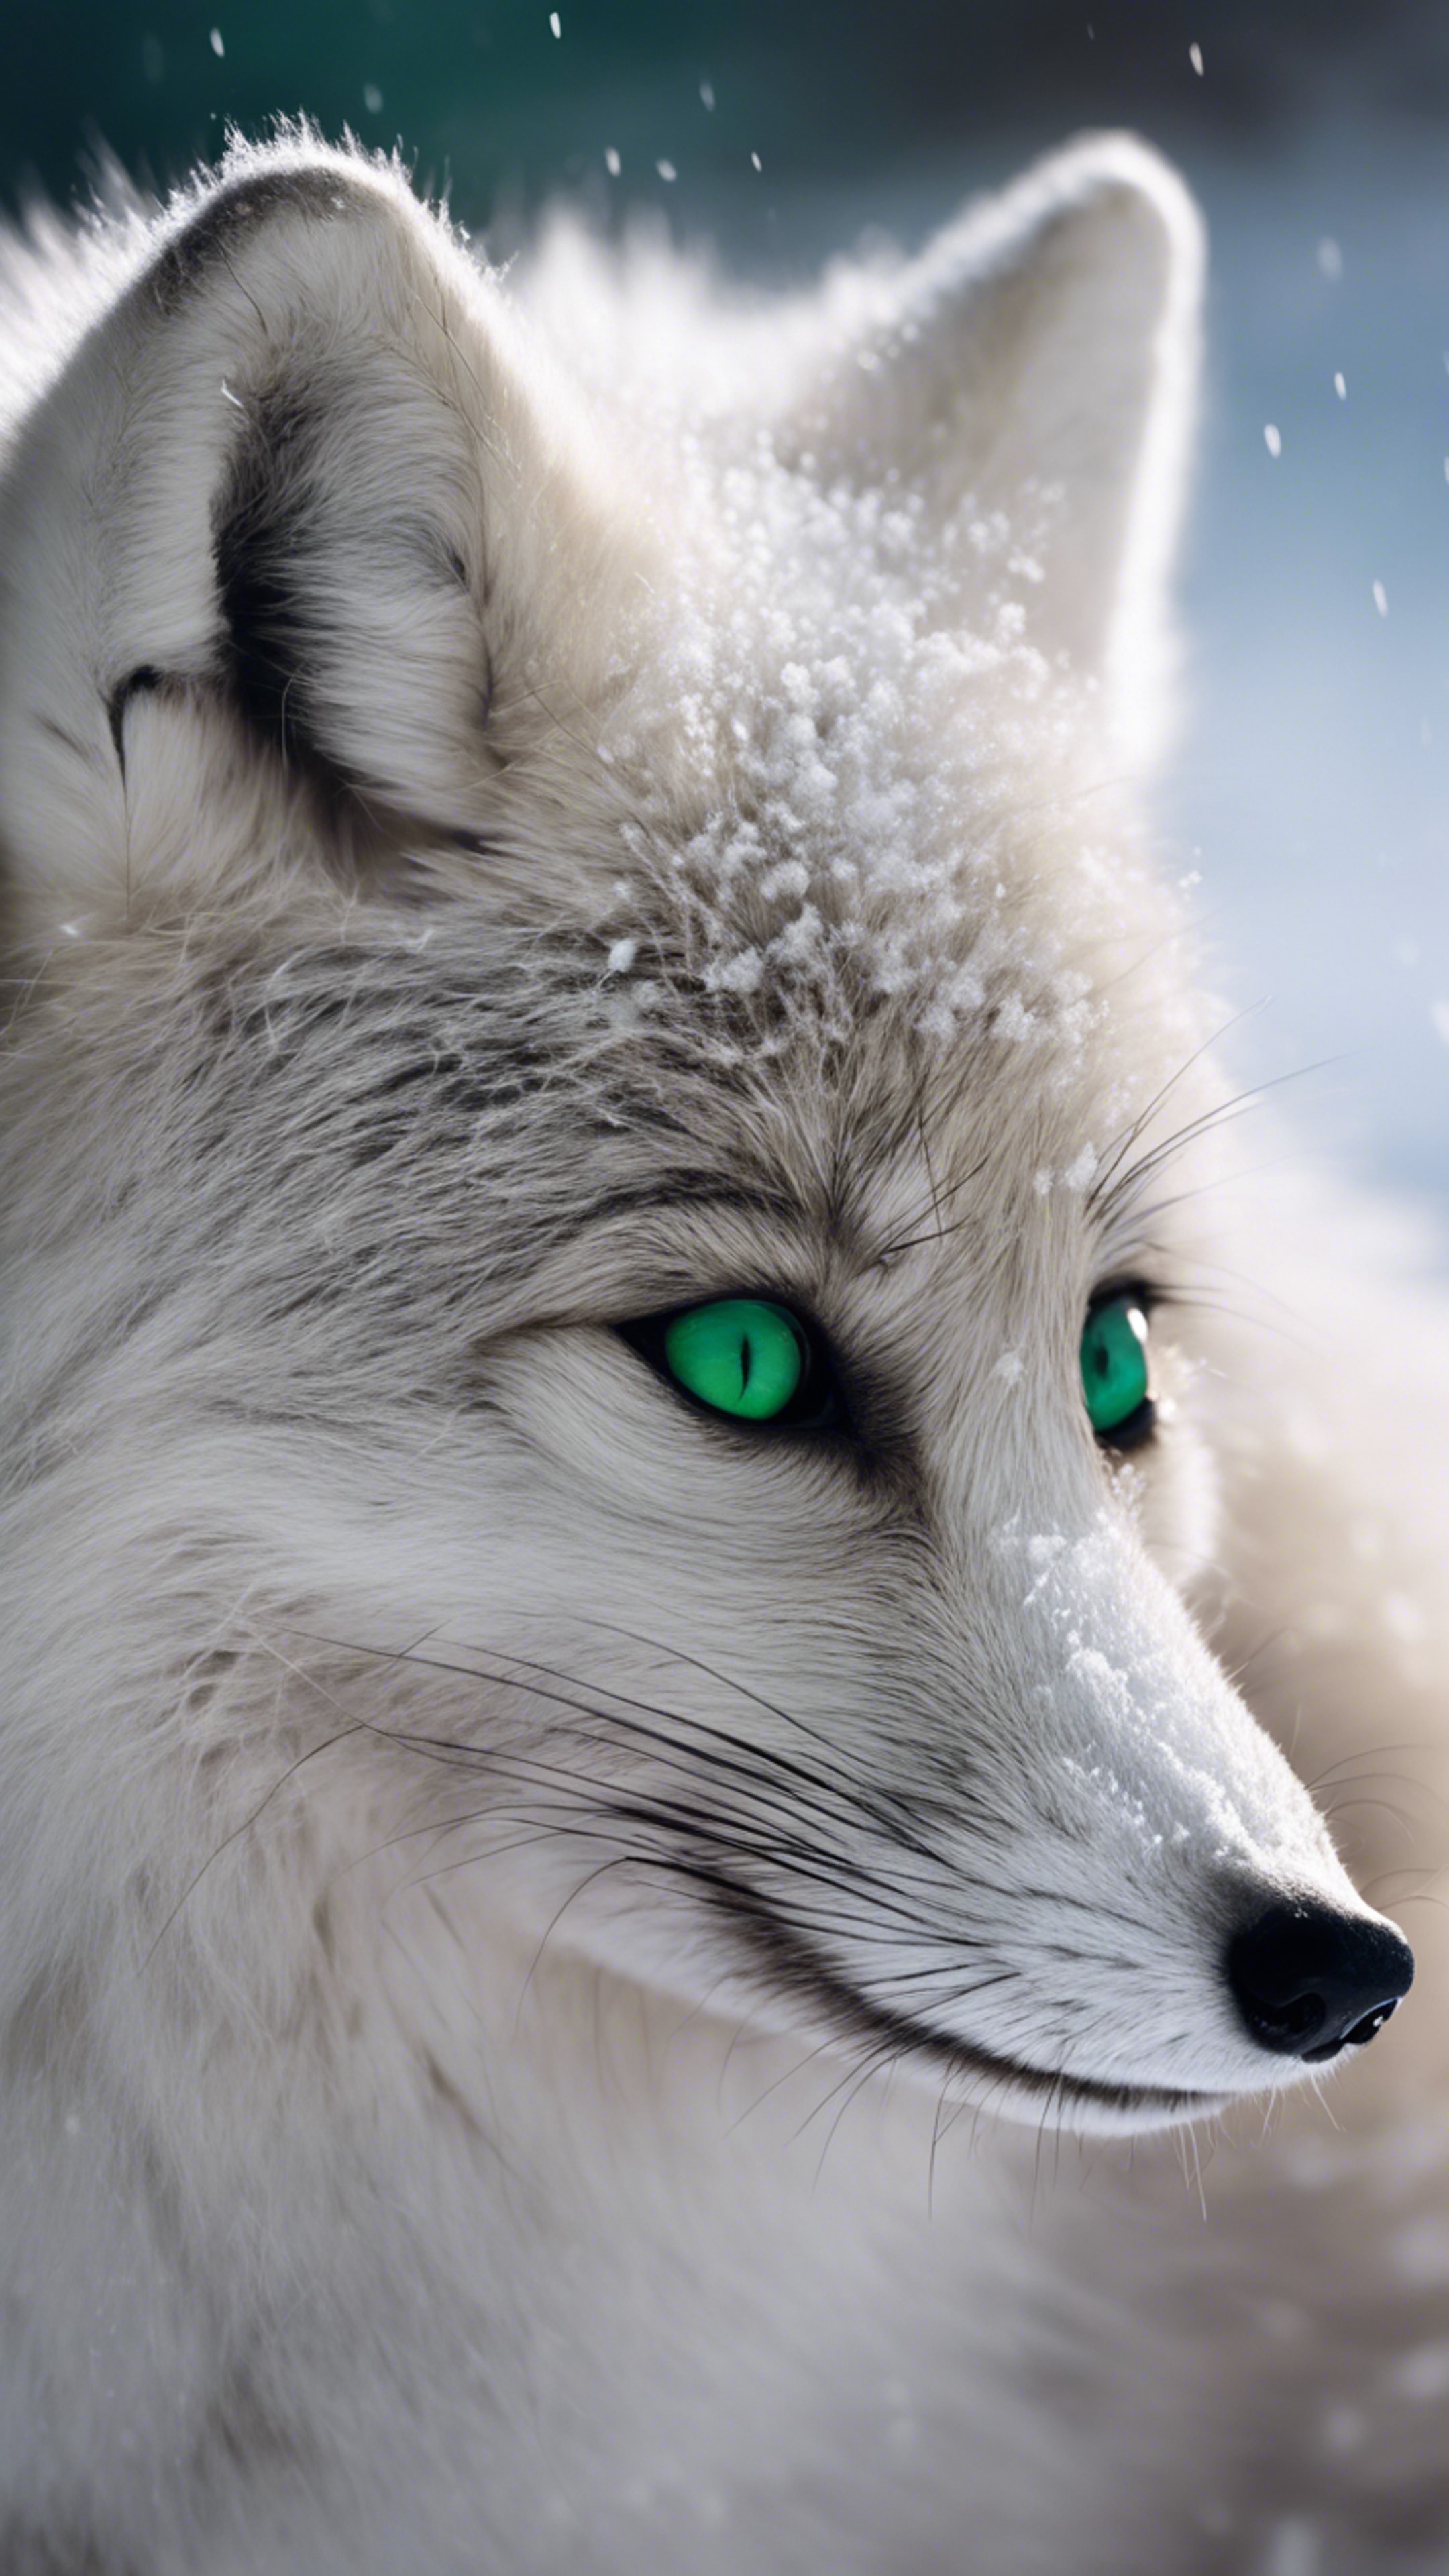 A fluffy, smoky gray arctic fox curled up in a snowy setting, its vivid green eyes staring directly at the viewer. Wallpaper[a0ededdcc5bf4726bdb5]